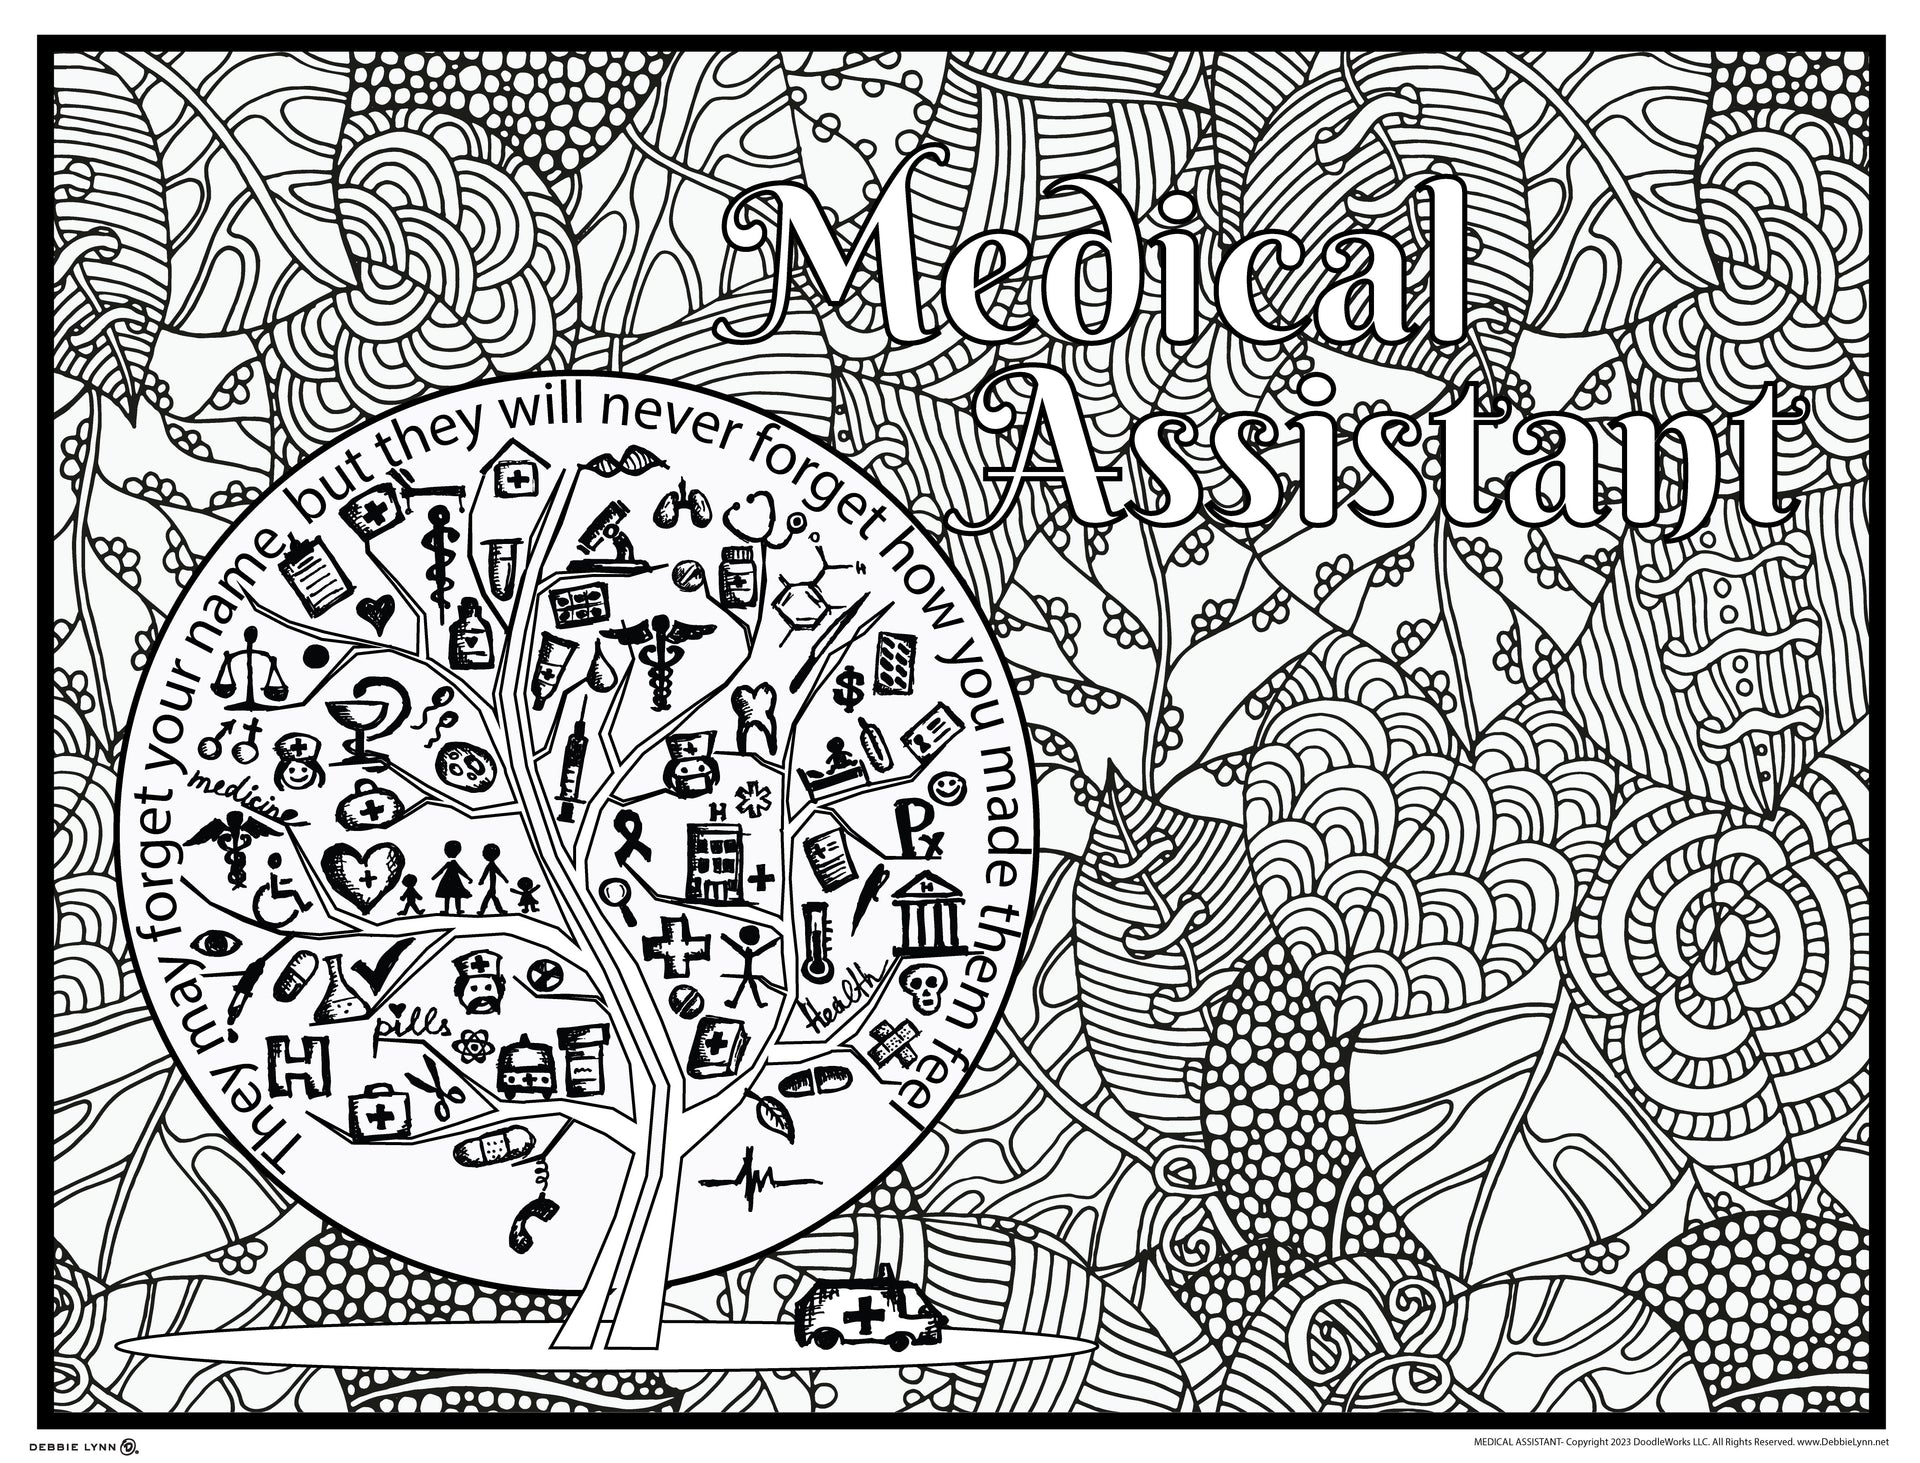 Helping Hands Community Personalized Giant Coloring Poster 48x63